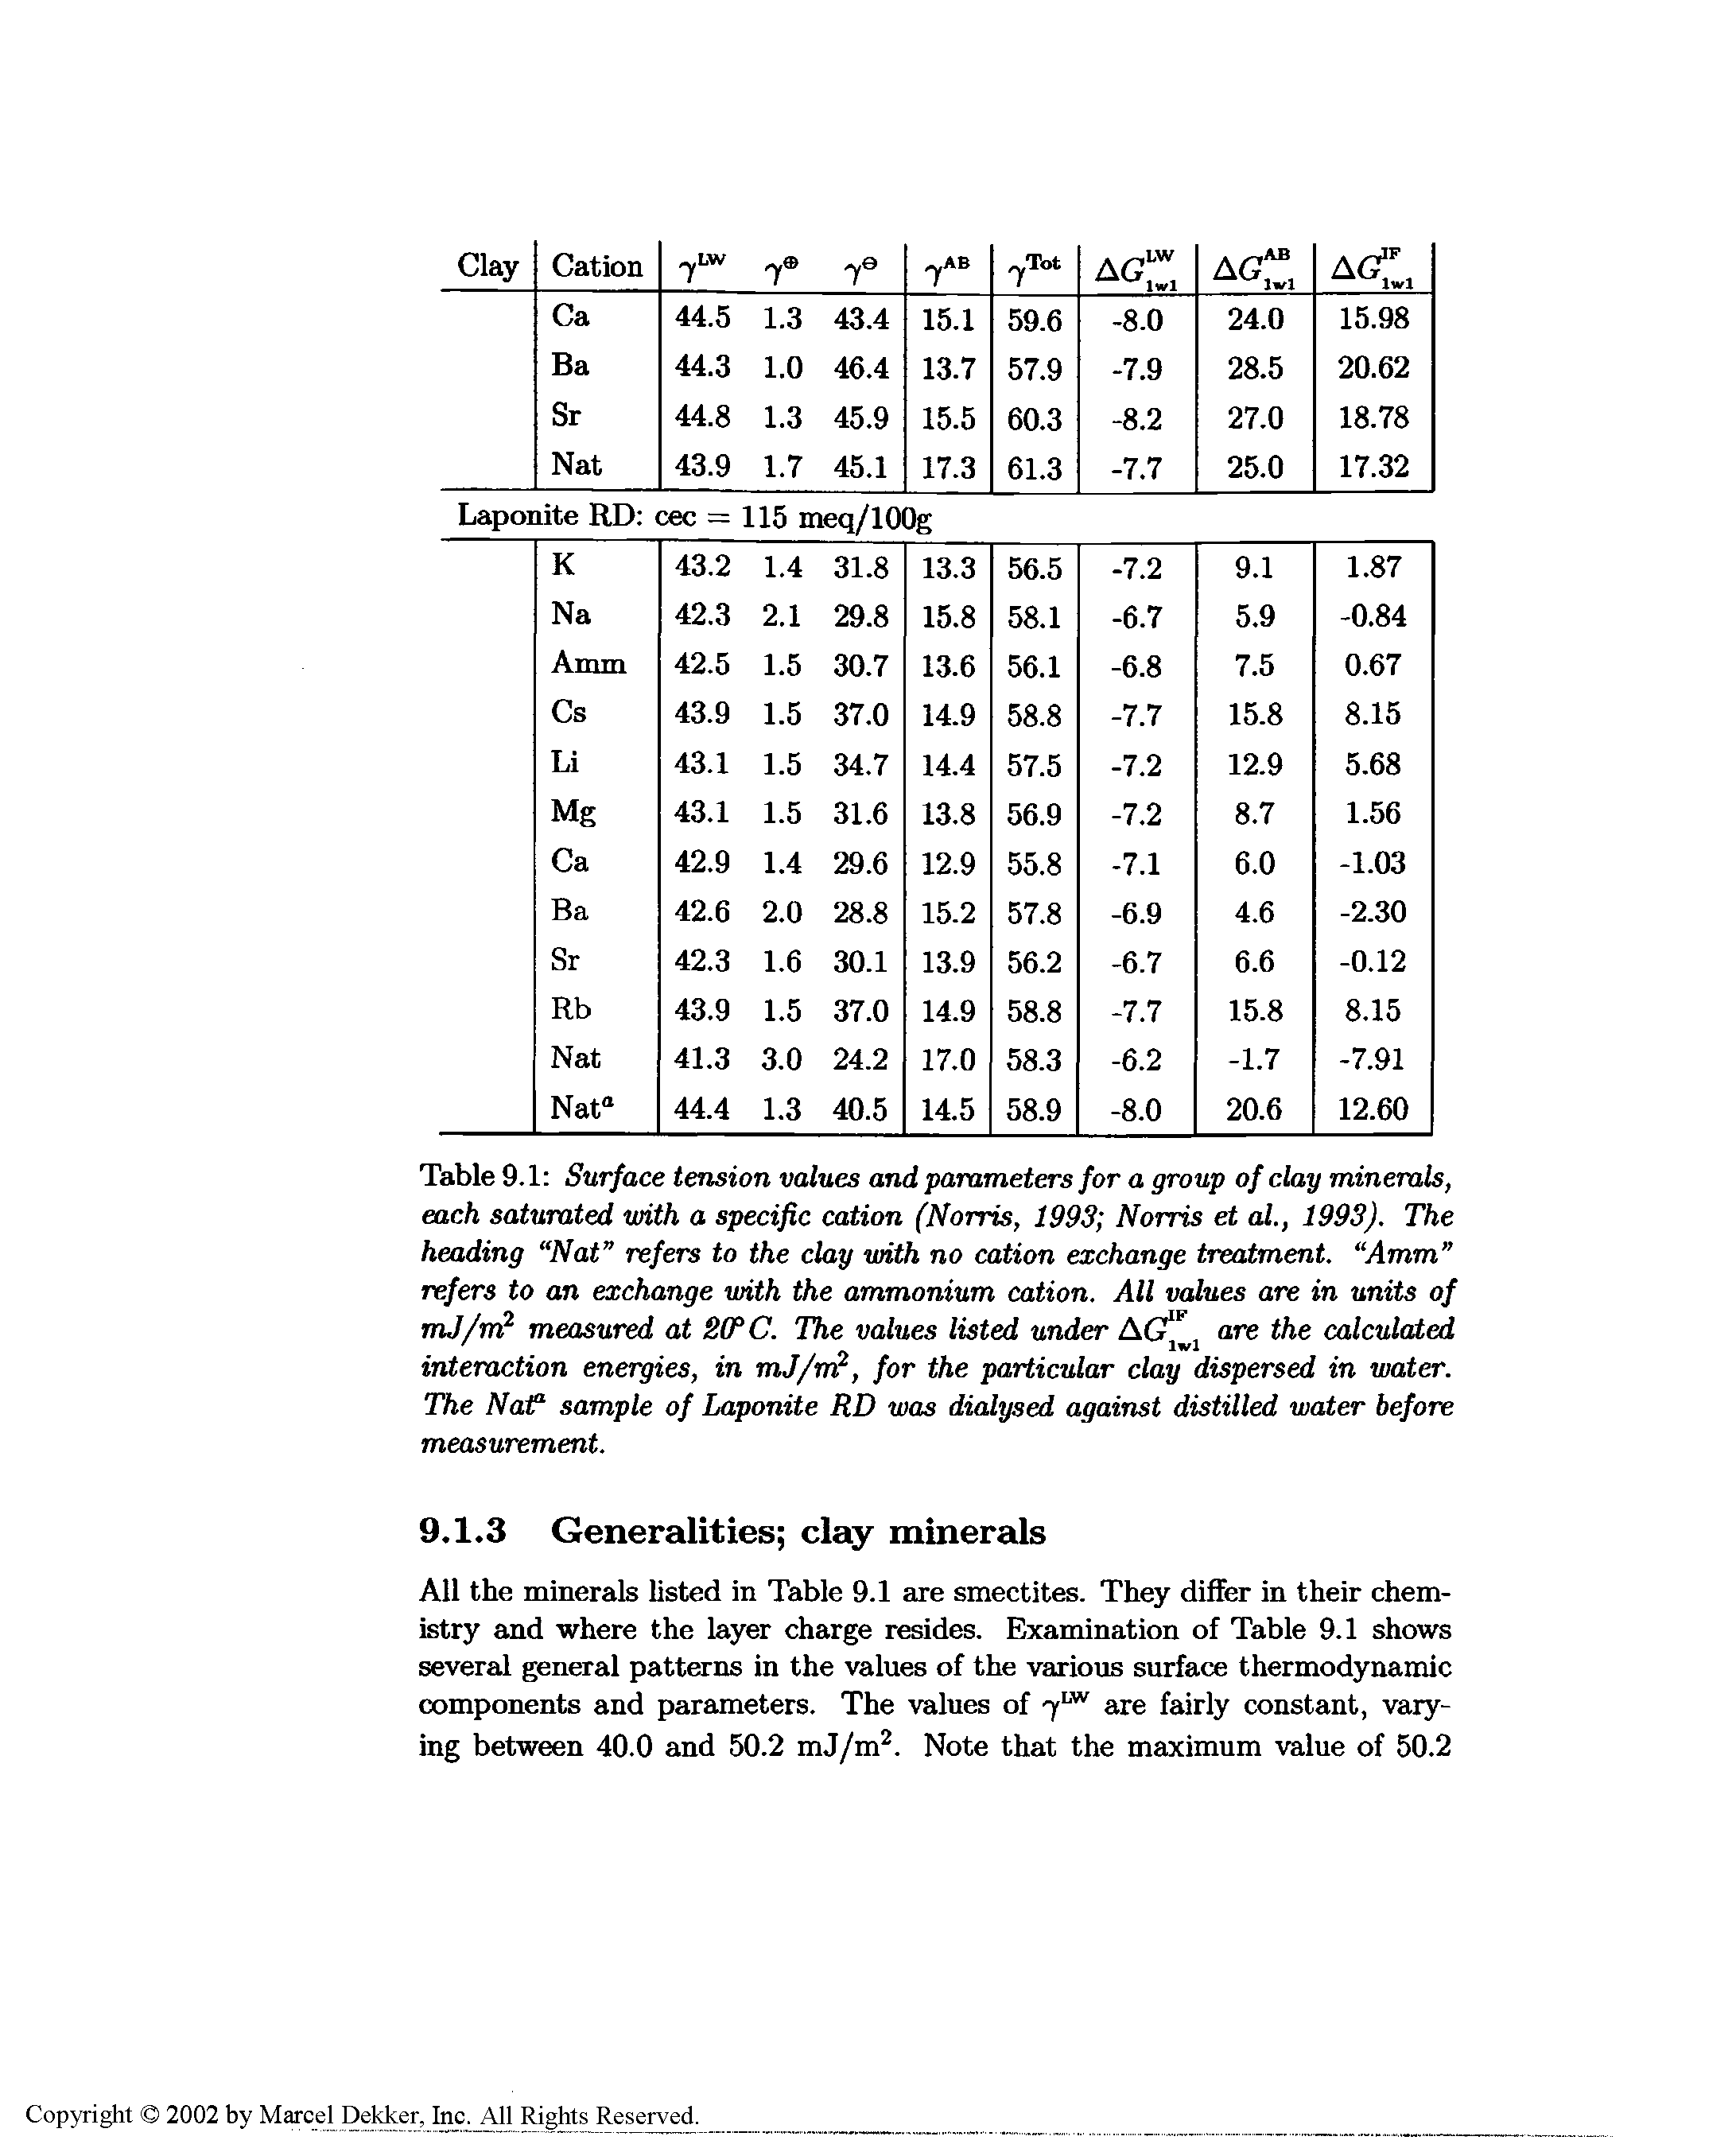 Table 9.1 Surface tension values and parameters for a group of clay minerals, each saturated with a specific cation (Norris, 1993 Norris et al., 1993). The heading Nat refers to the clay with no cation exchange treatment. Amm refers to an exchange with the ammonium cation. All values are in units of mJ/w measured at 2CPC. The values listed under are the calculated...